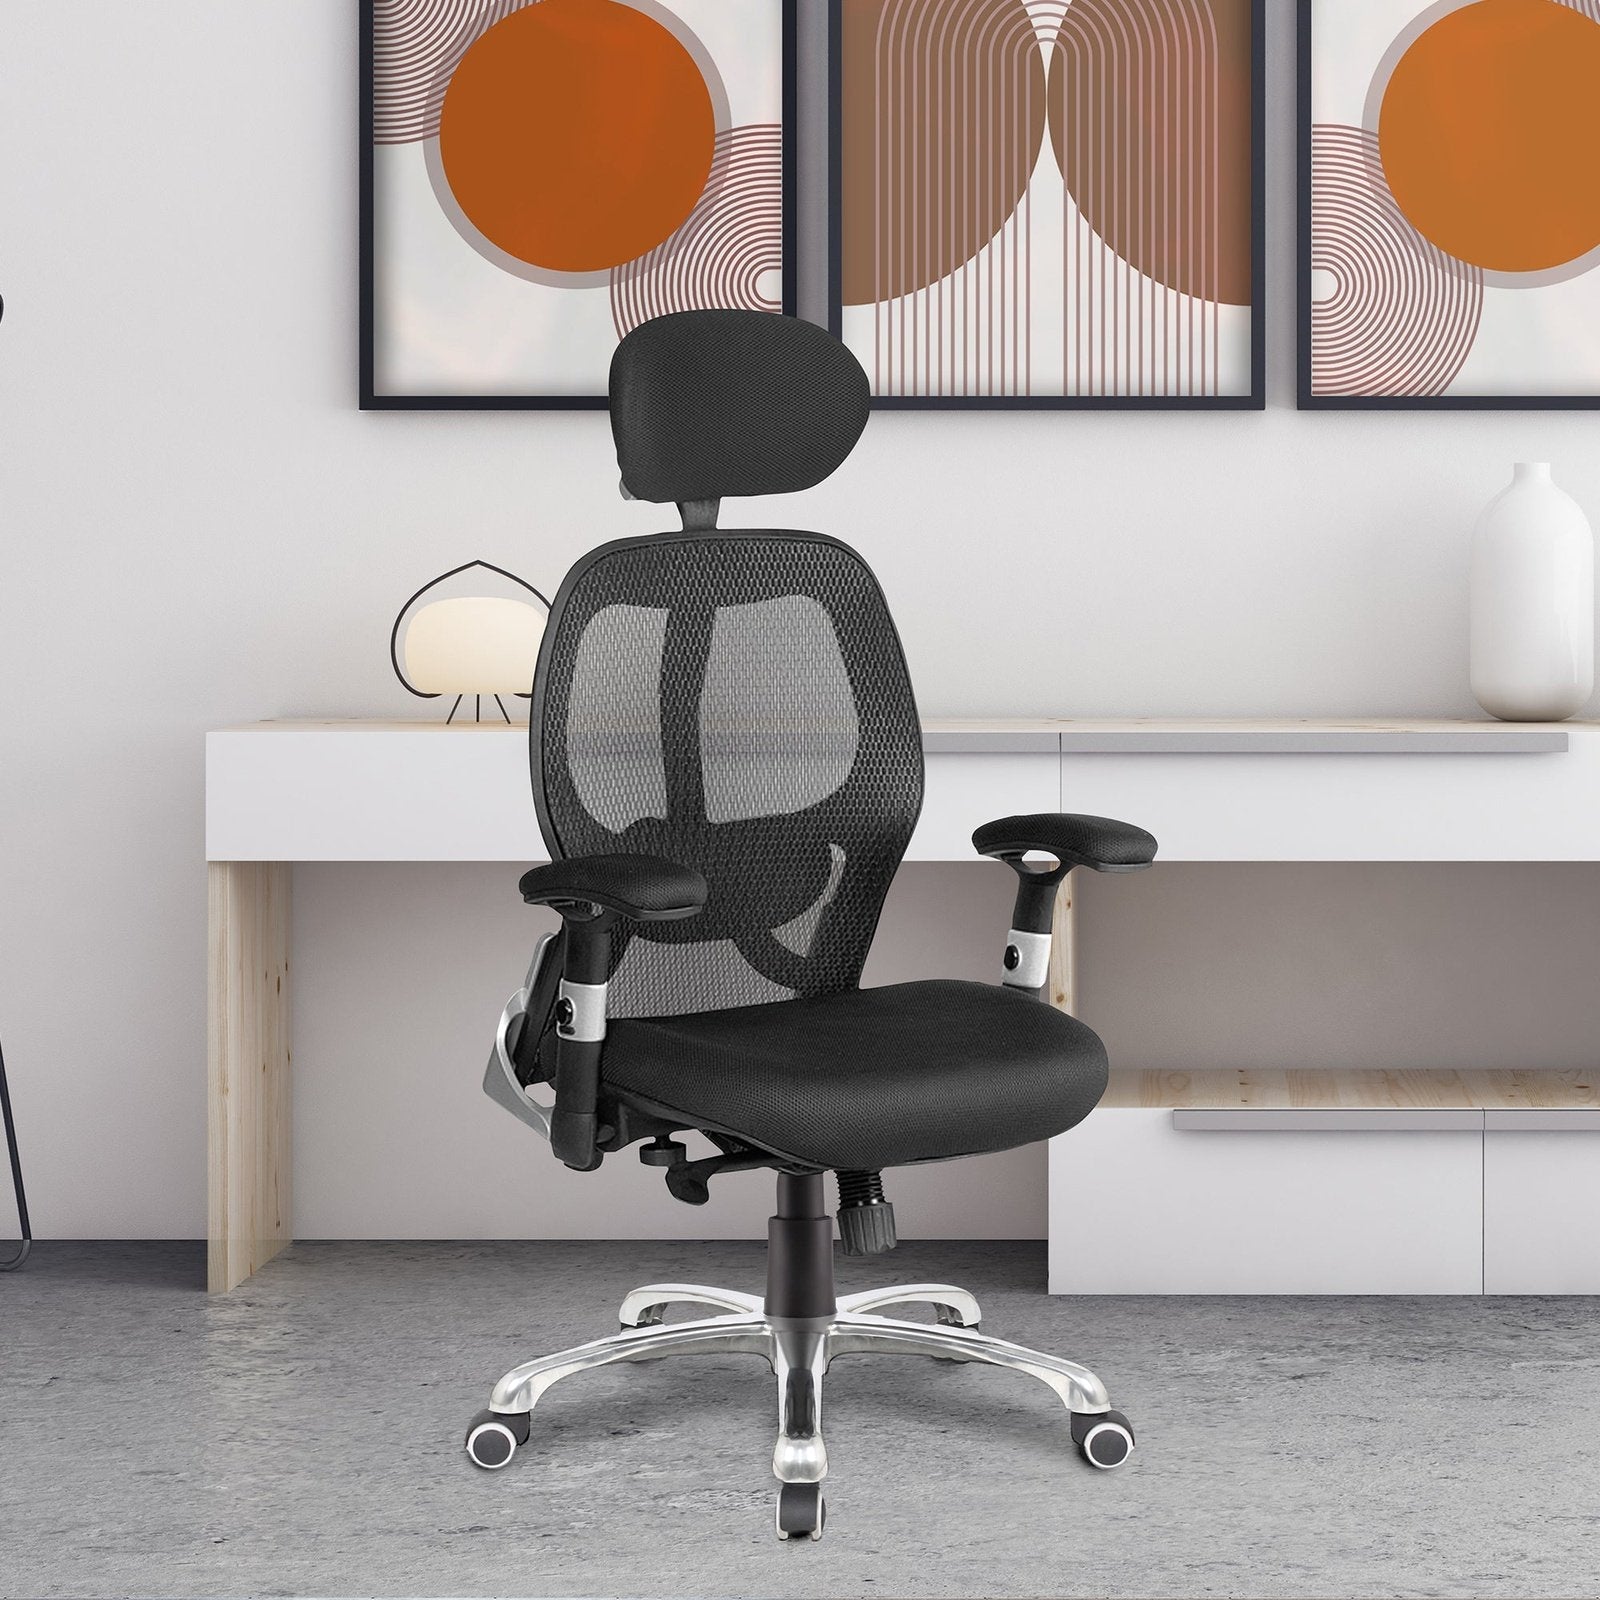 Ergonomic Luxury High Back Executive Mesh Chair with Chrome Base Certified for 24 Hour Use - Black - Office Products Online